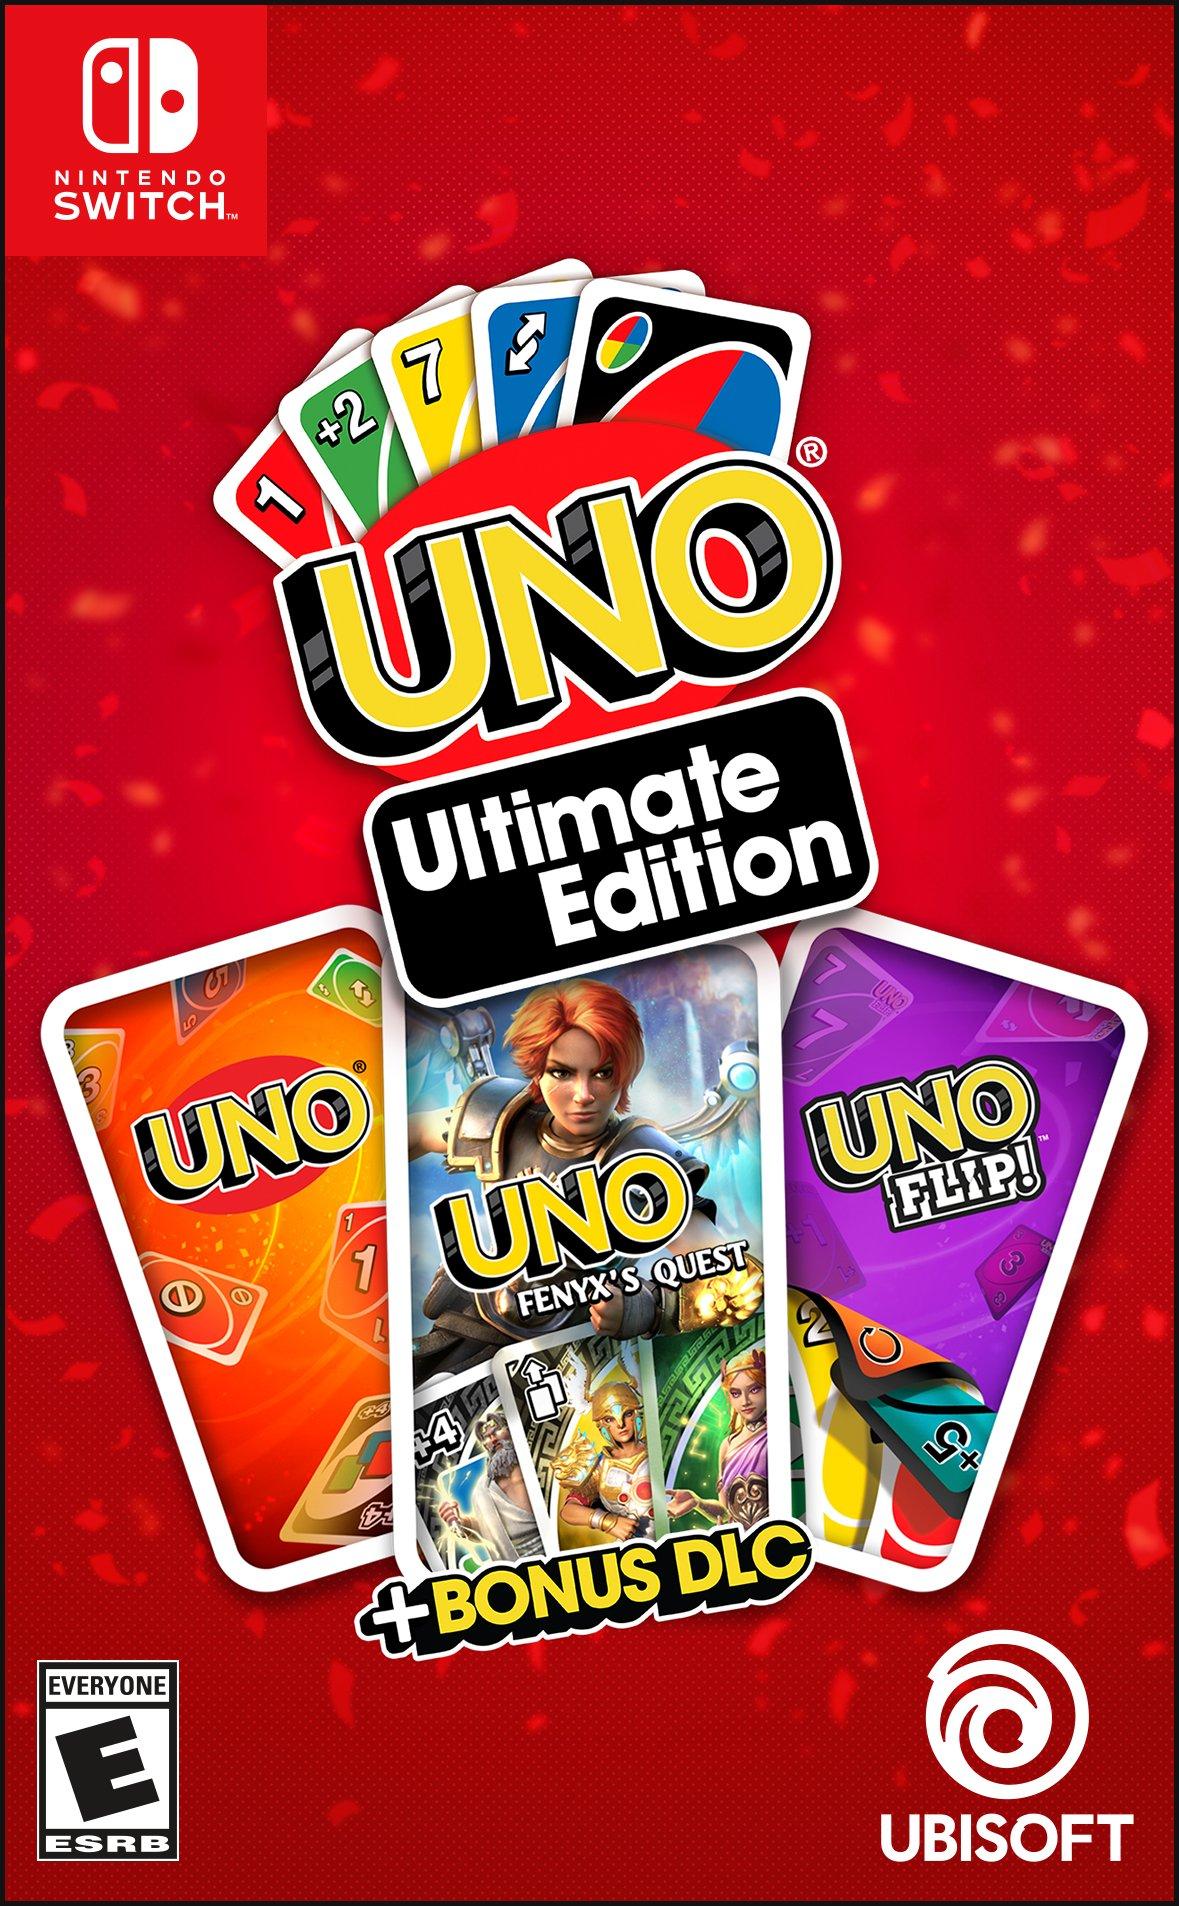 Is Uno cross-platform? Can you play on PC, Xbox, PS and Switch